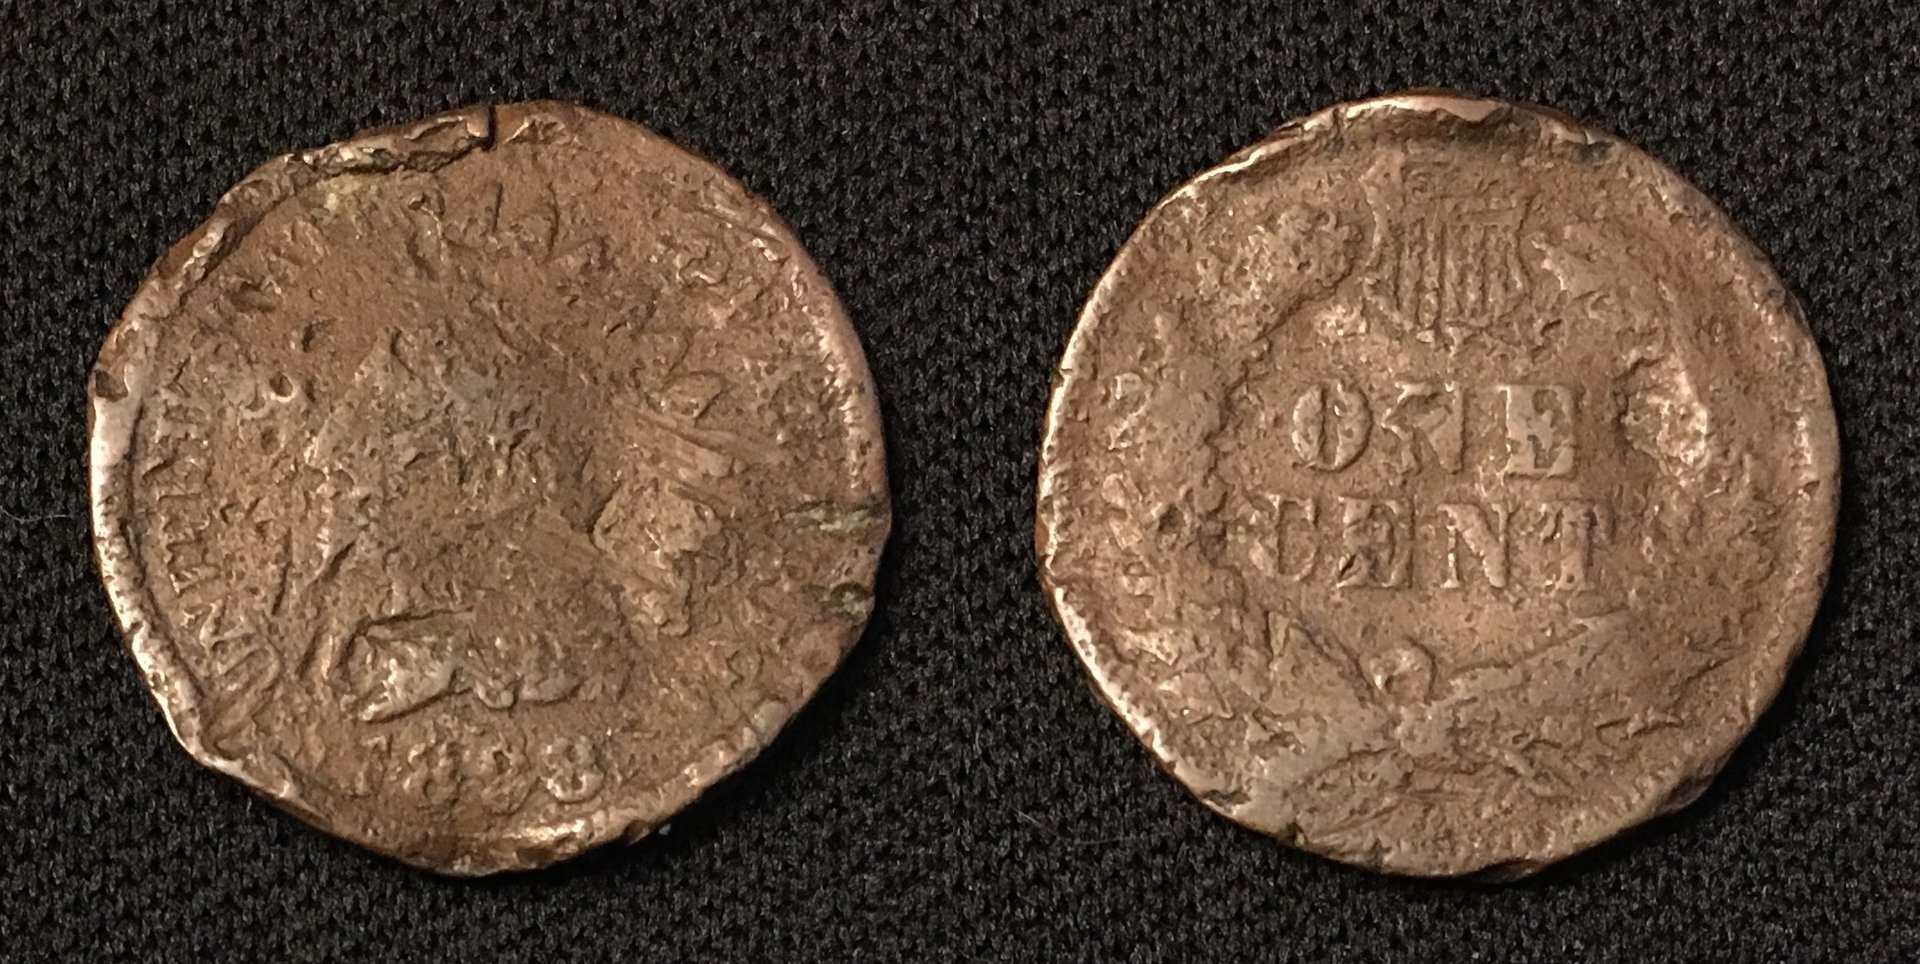 1898 1 Cent S1 Combined.jpg